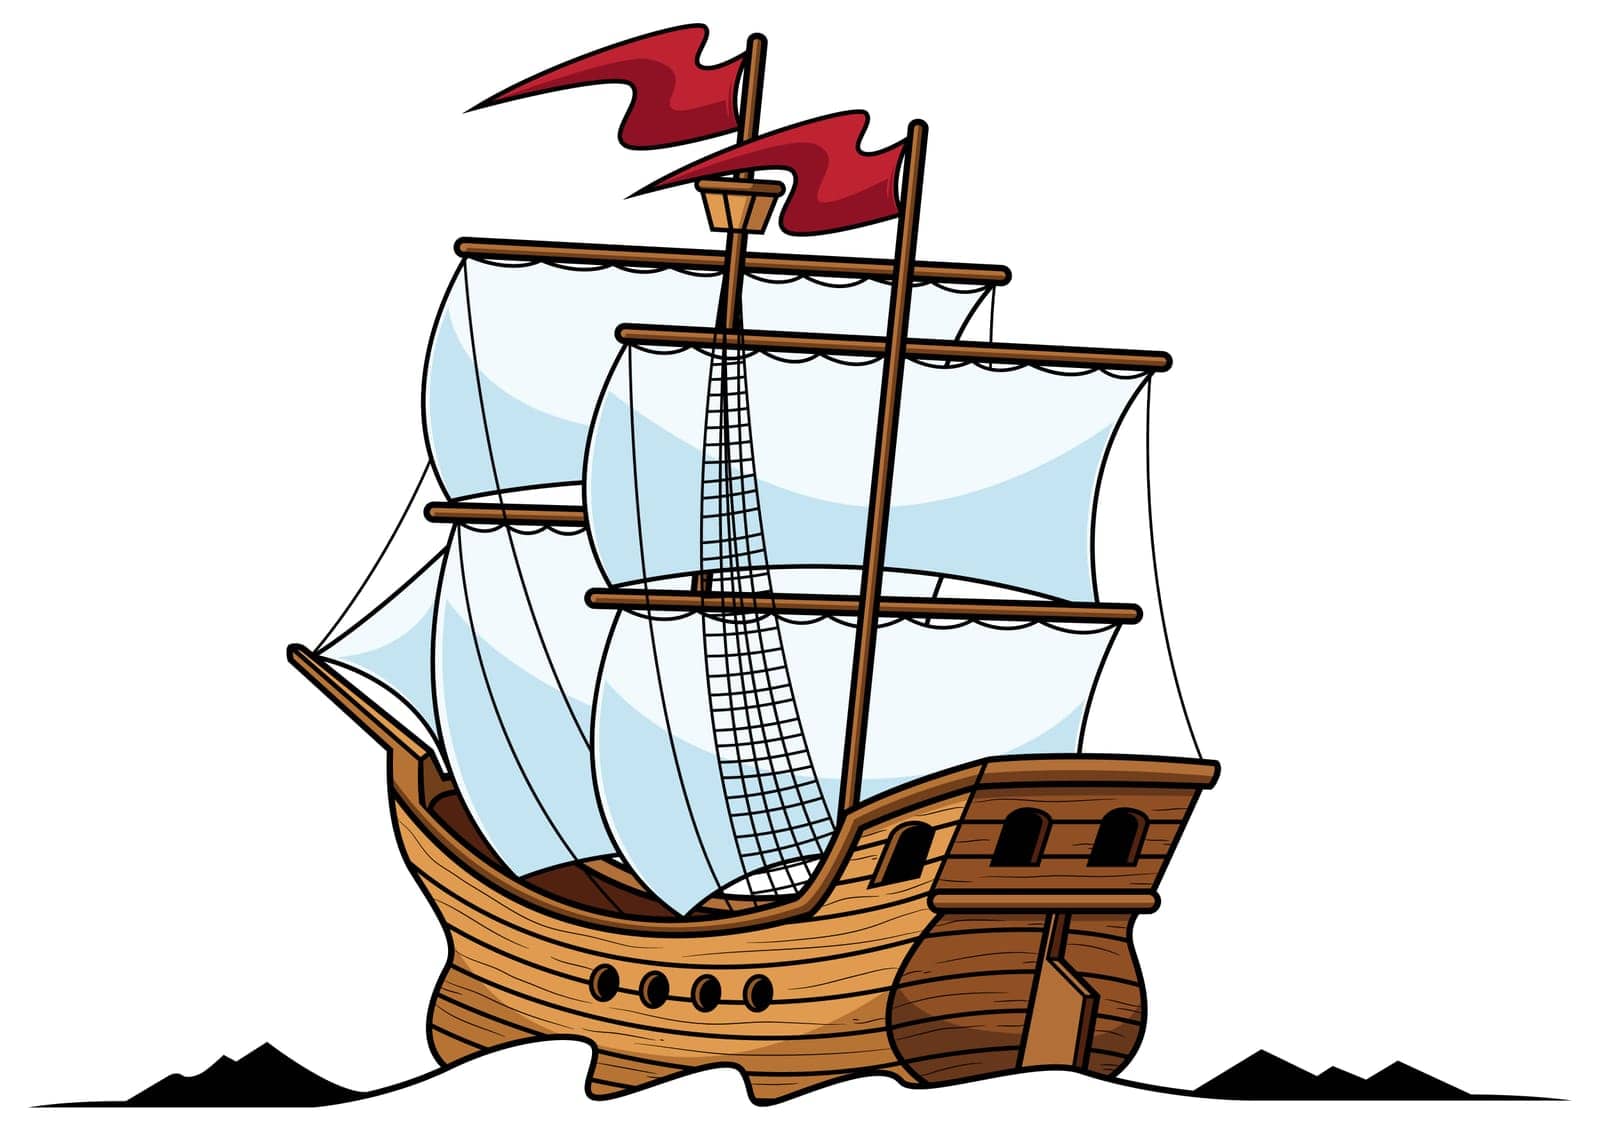 Mascot or logo with a galleon sailing ship isolated on white background.